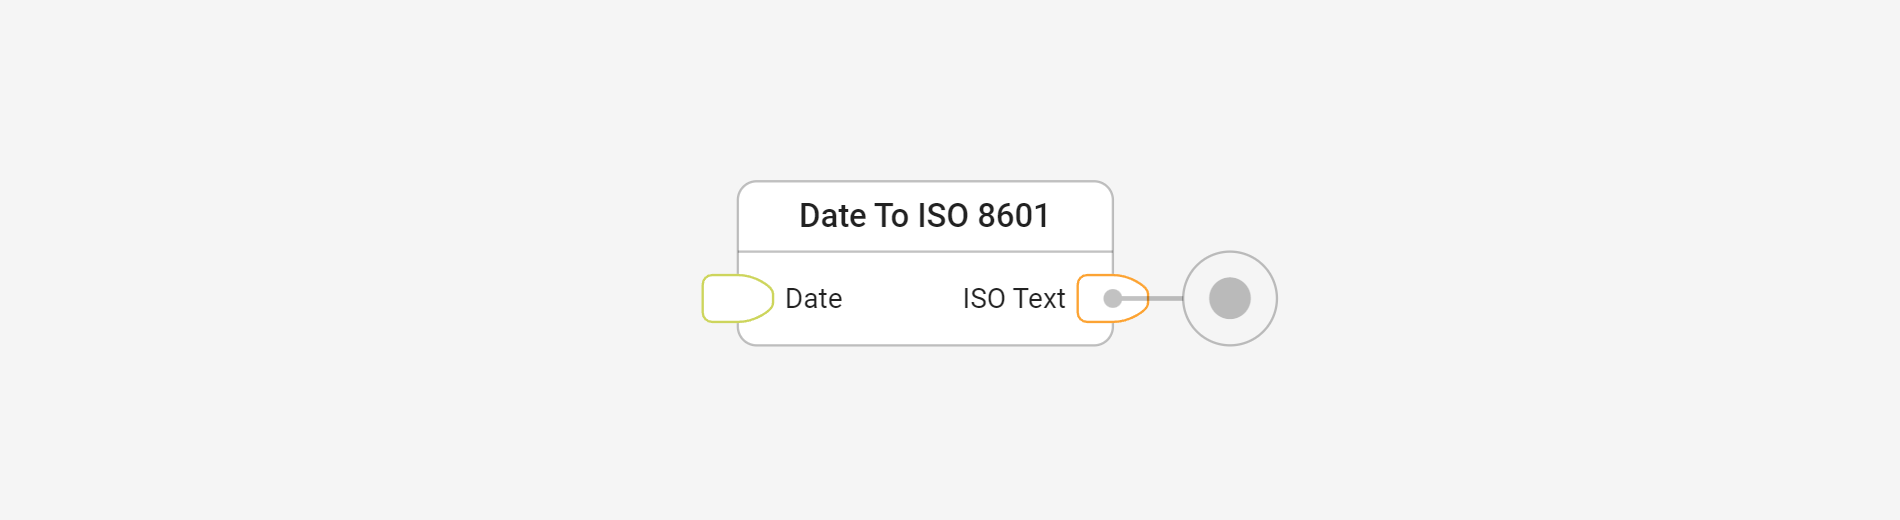 Convert a date to an ISO date text